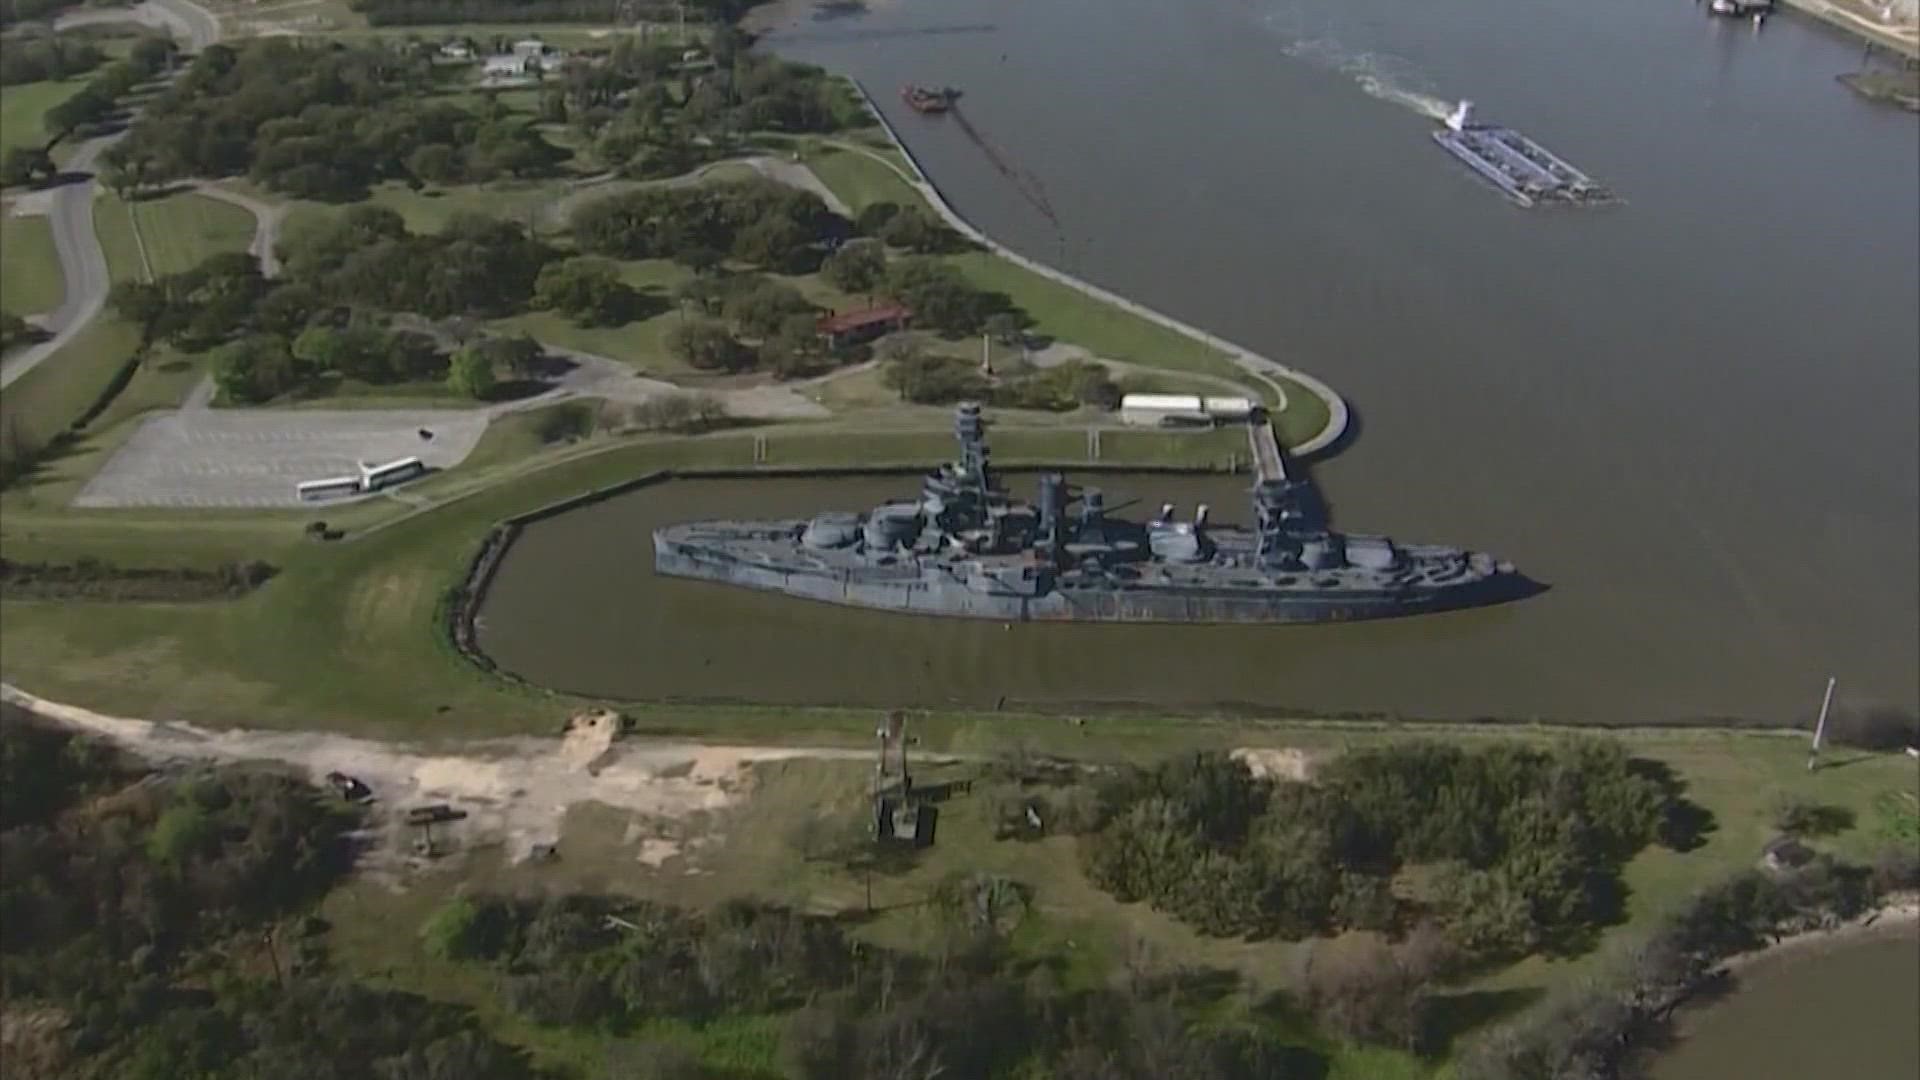 Among being one of the baddest battleships known to man since launching in 1912, Battleship Texas found a niche in naval aviation history.